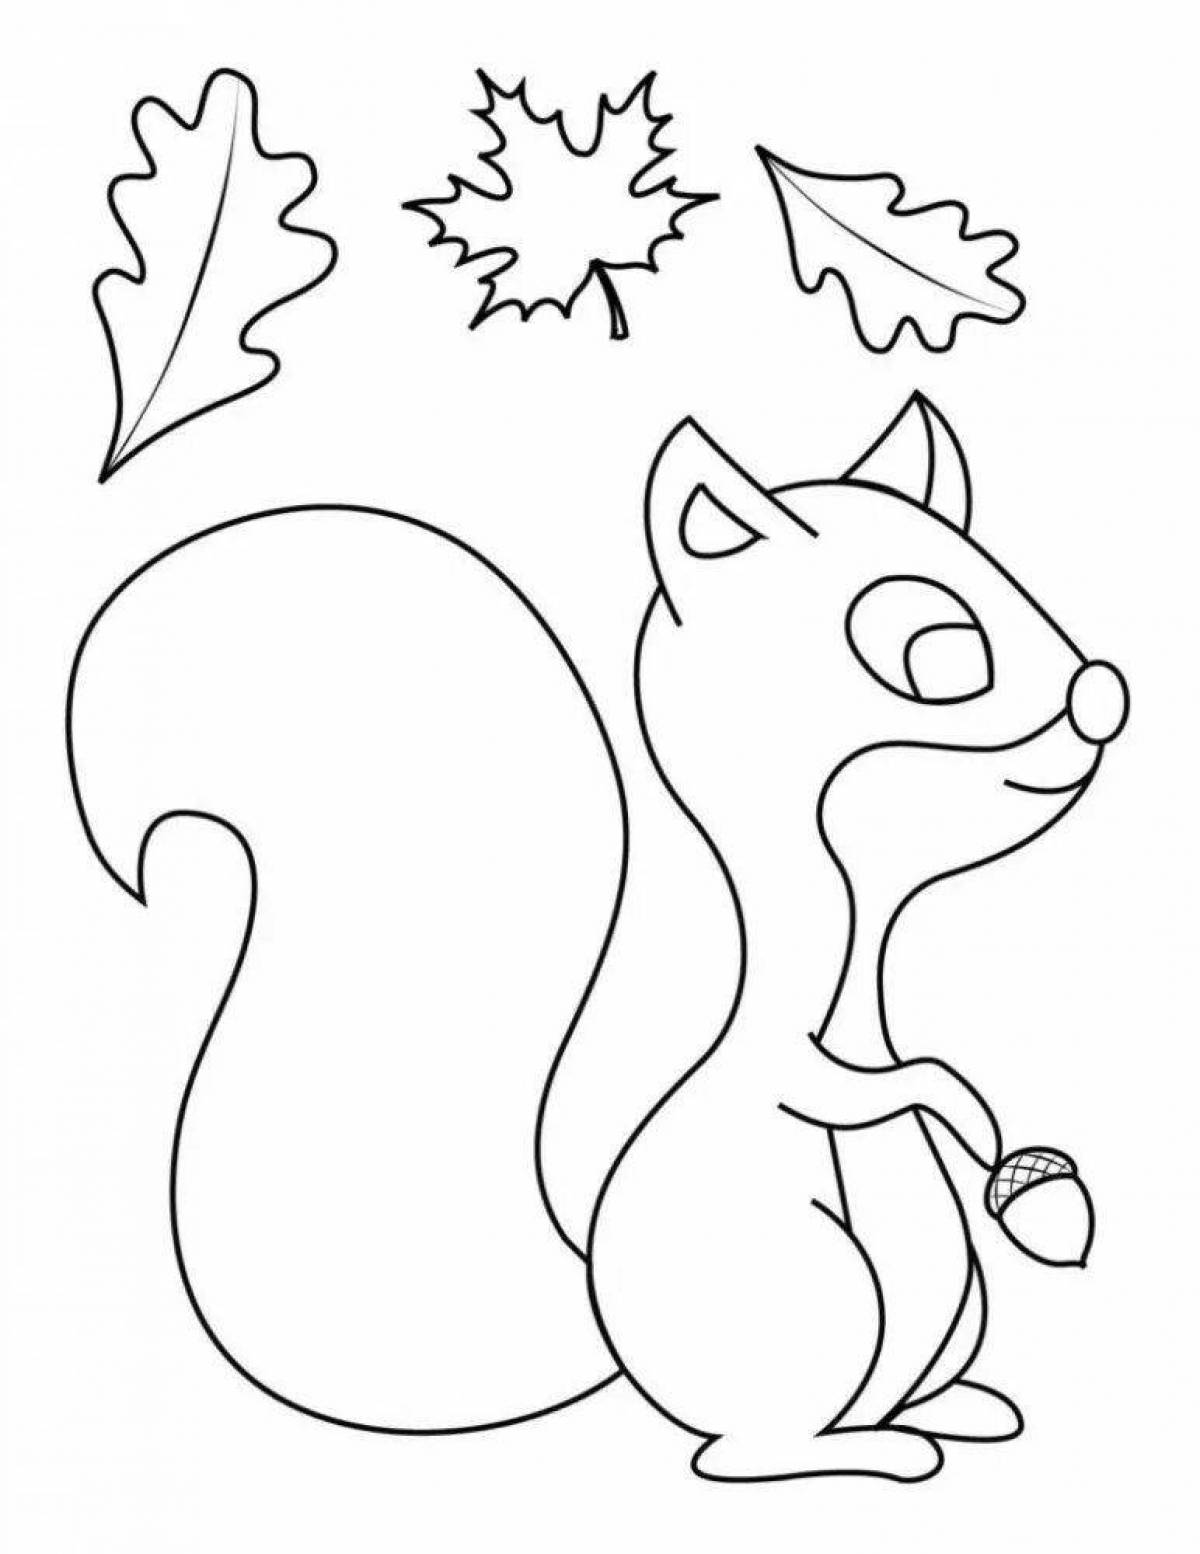 Magic coloring squirrel for children 3-4 years old